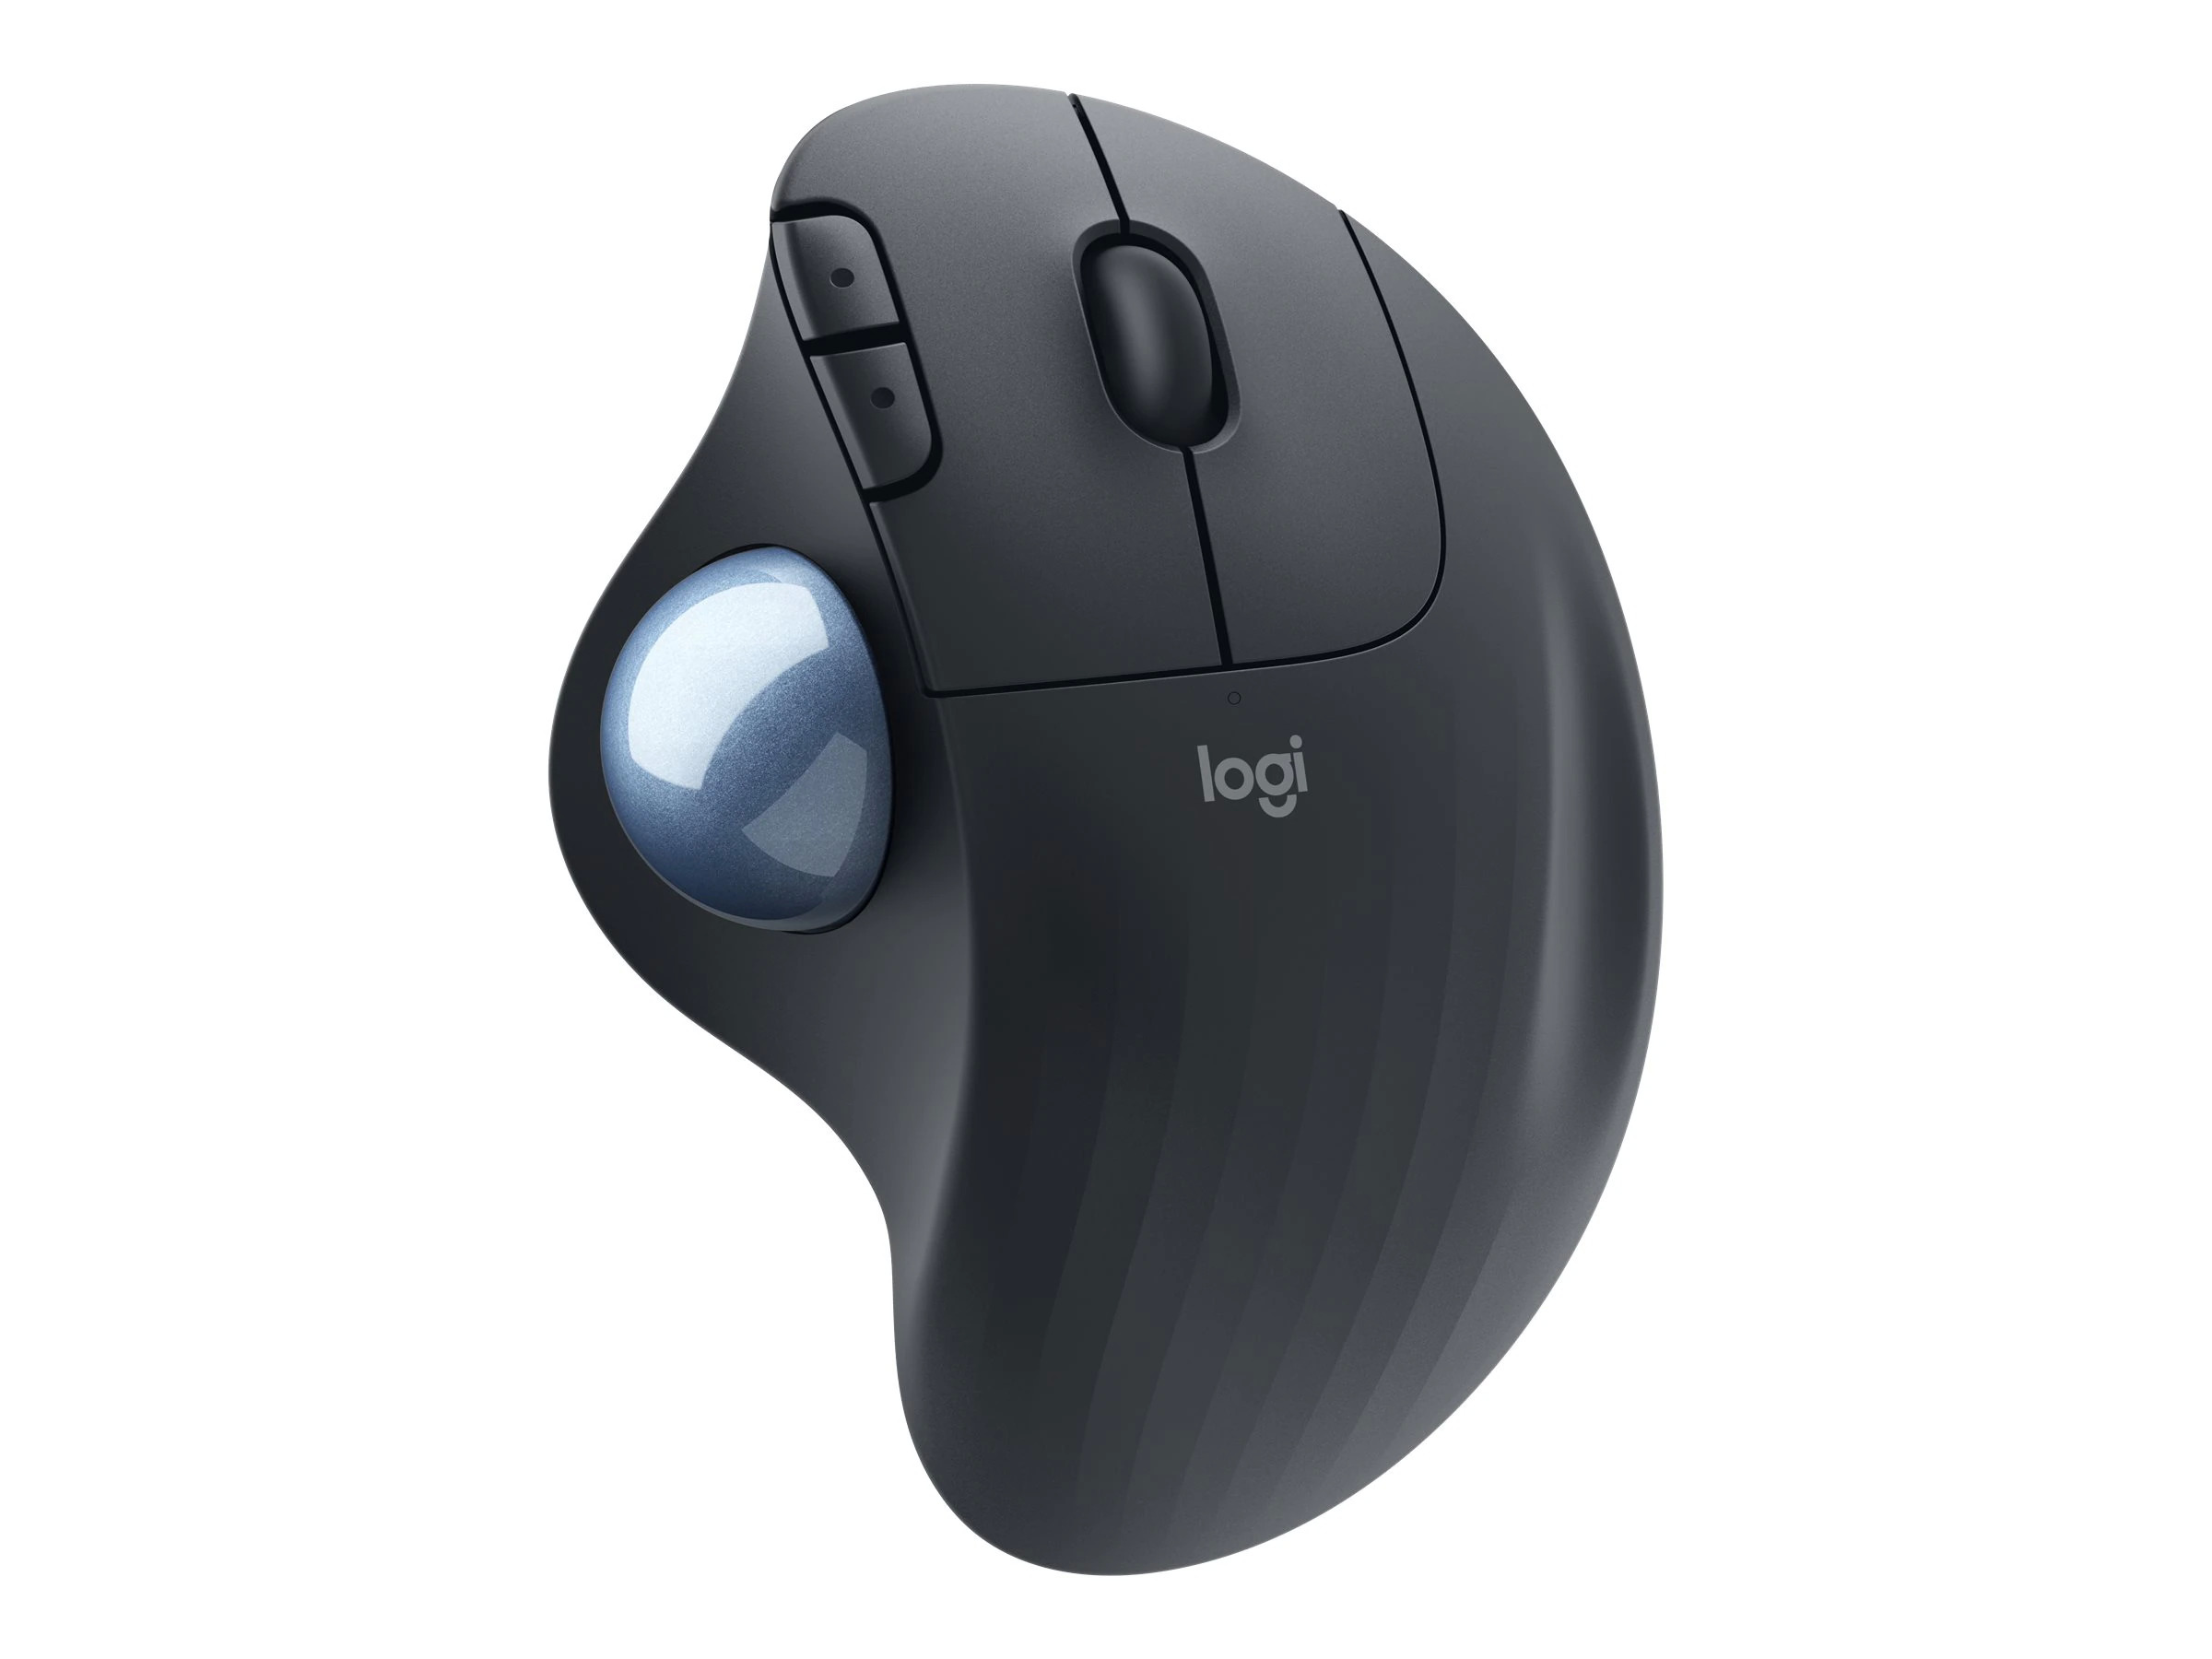 Logitech Ergo M575 Wireless Trackball Mouse (Black) $29.95 at Connection